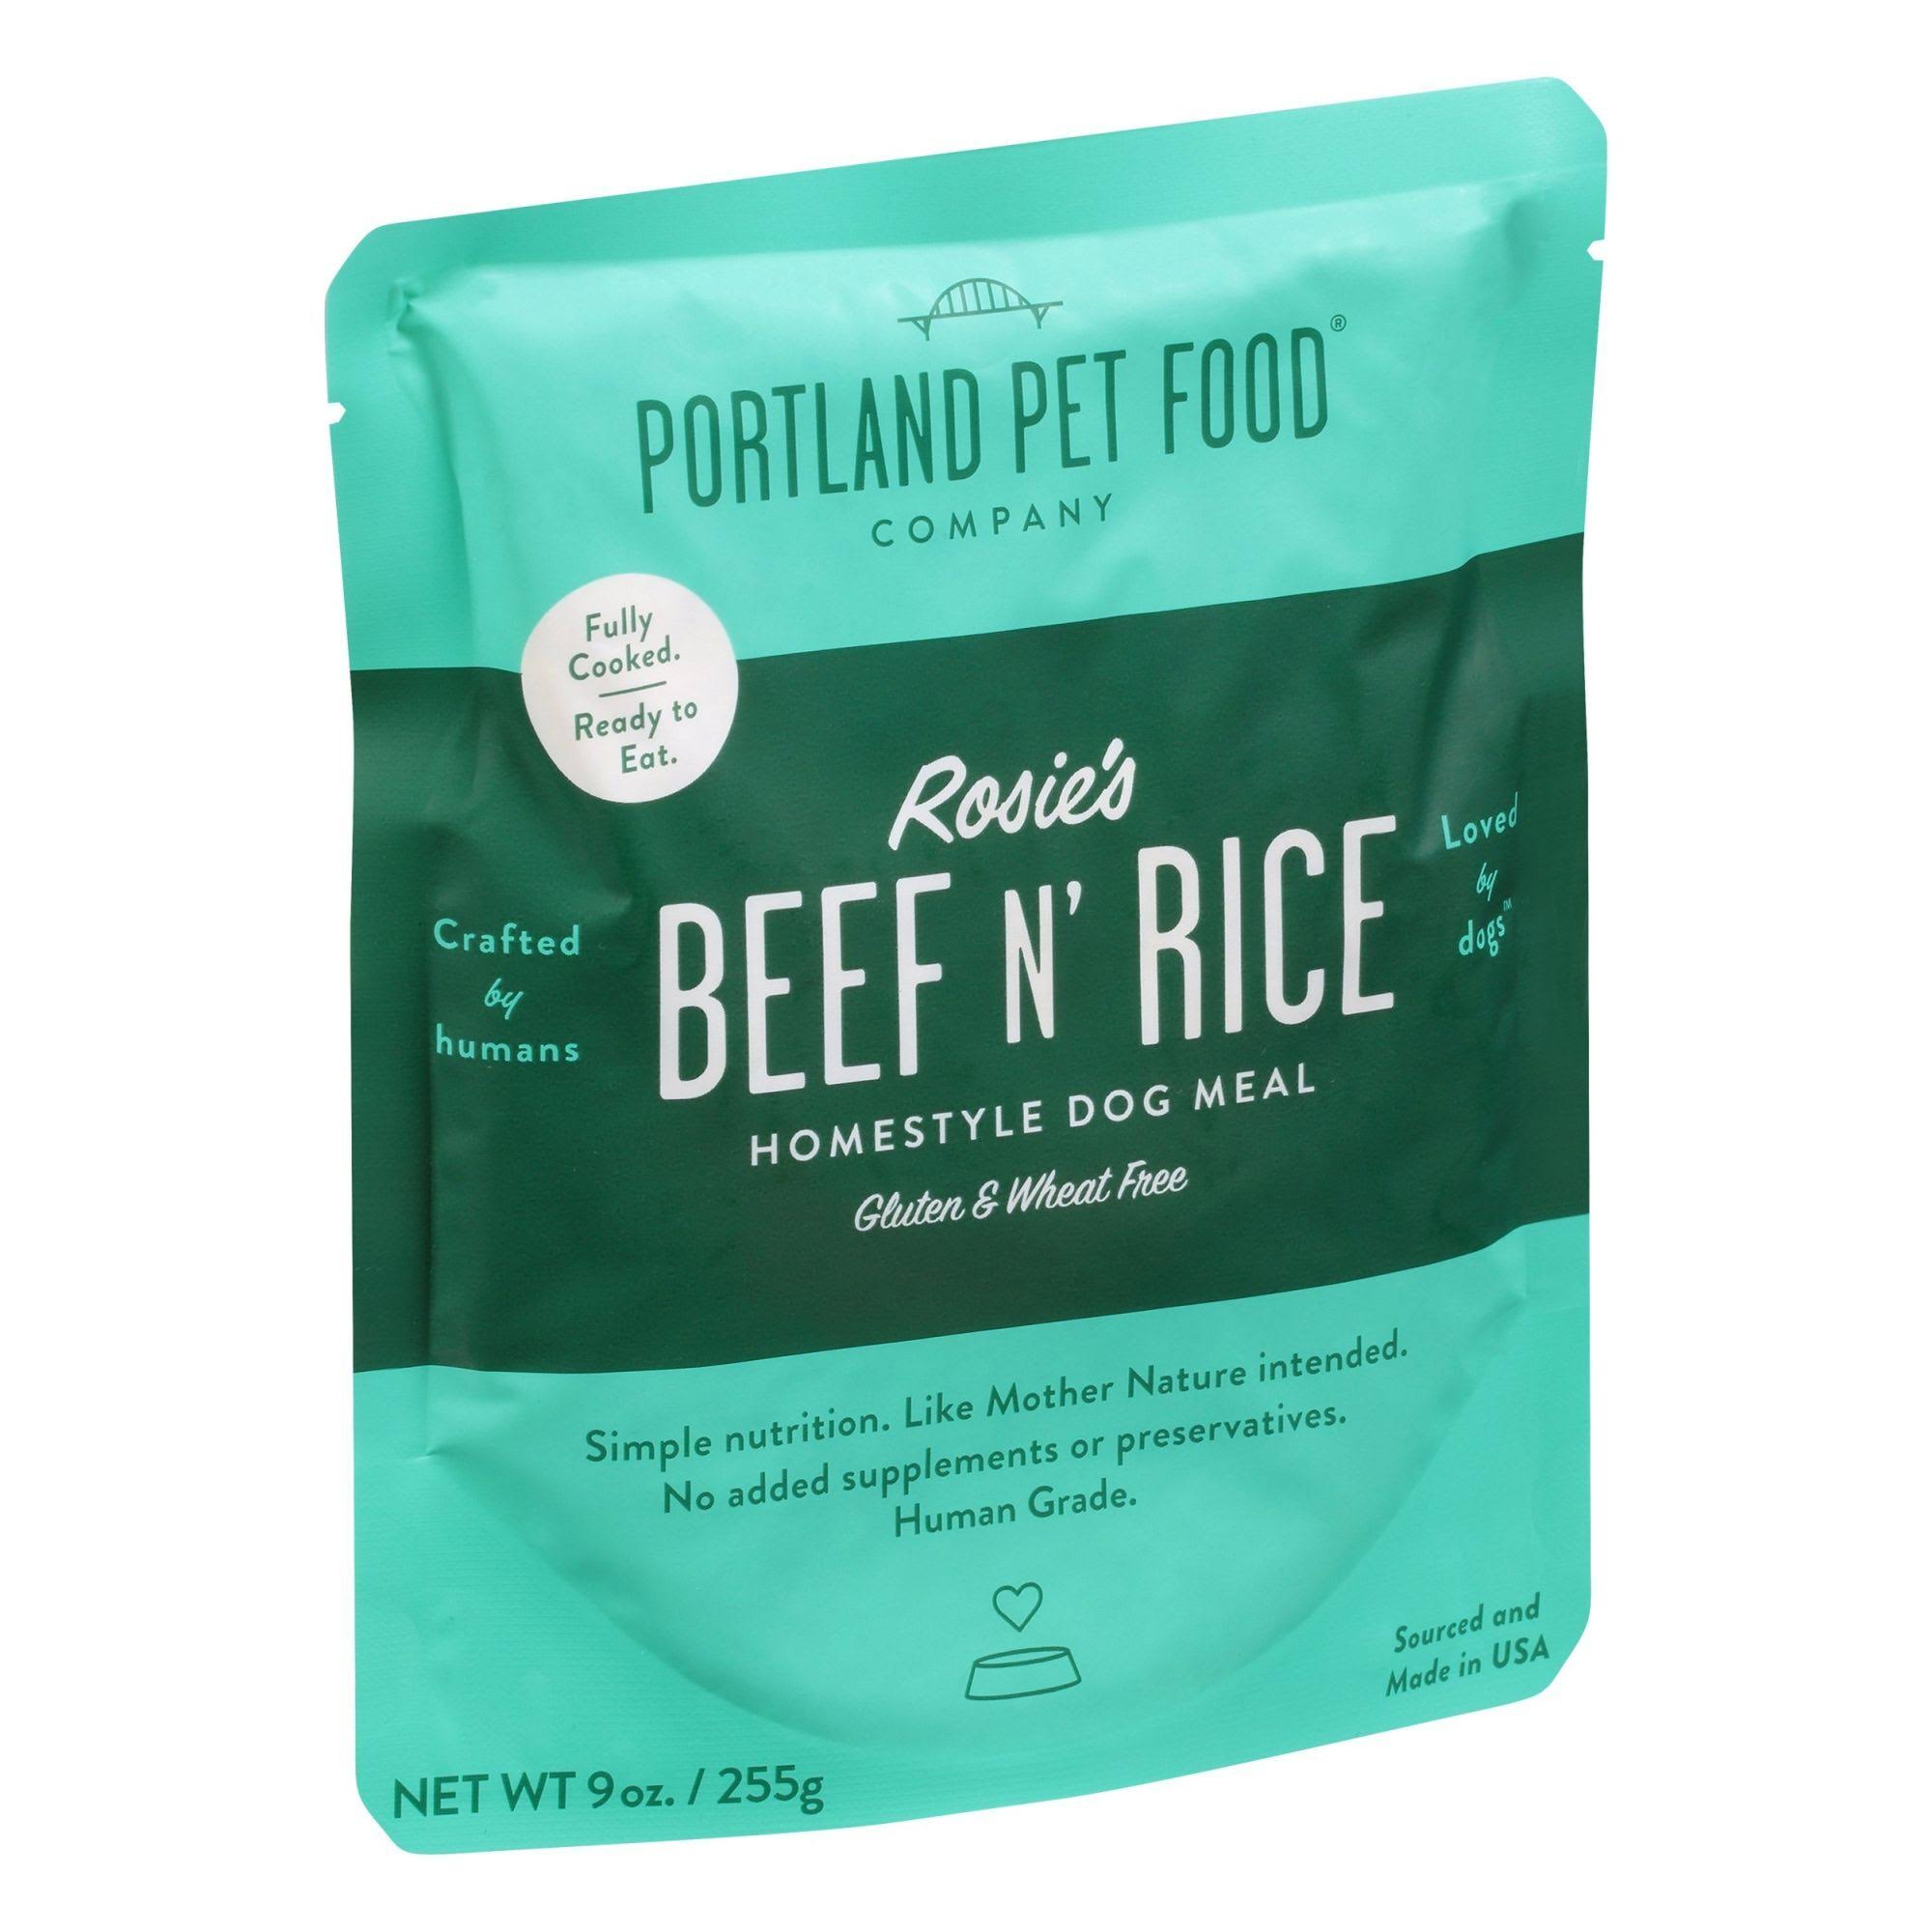 Portland Pet Food Rosie's Beef N' Rice All Natural Dog Meal - Microwaveable Meal Pouches Healthy, 6 Pack